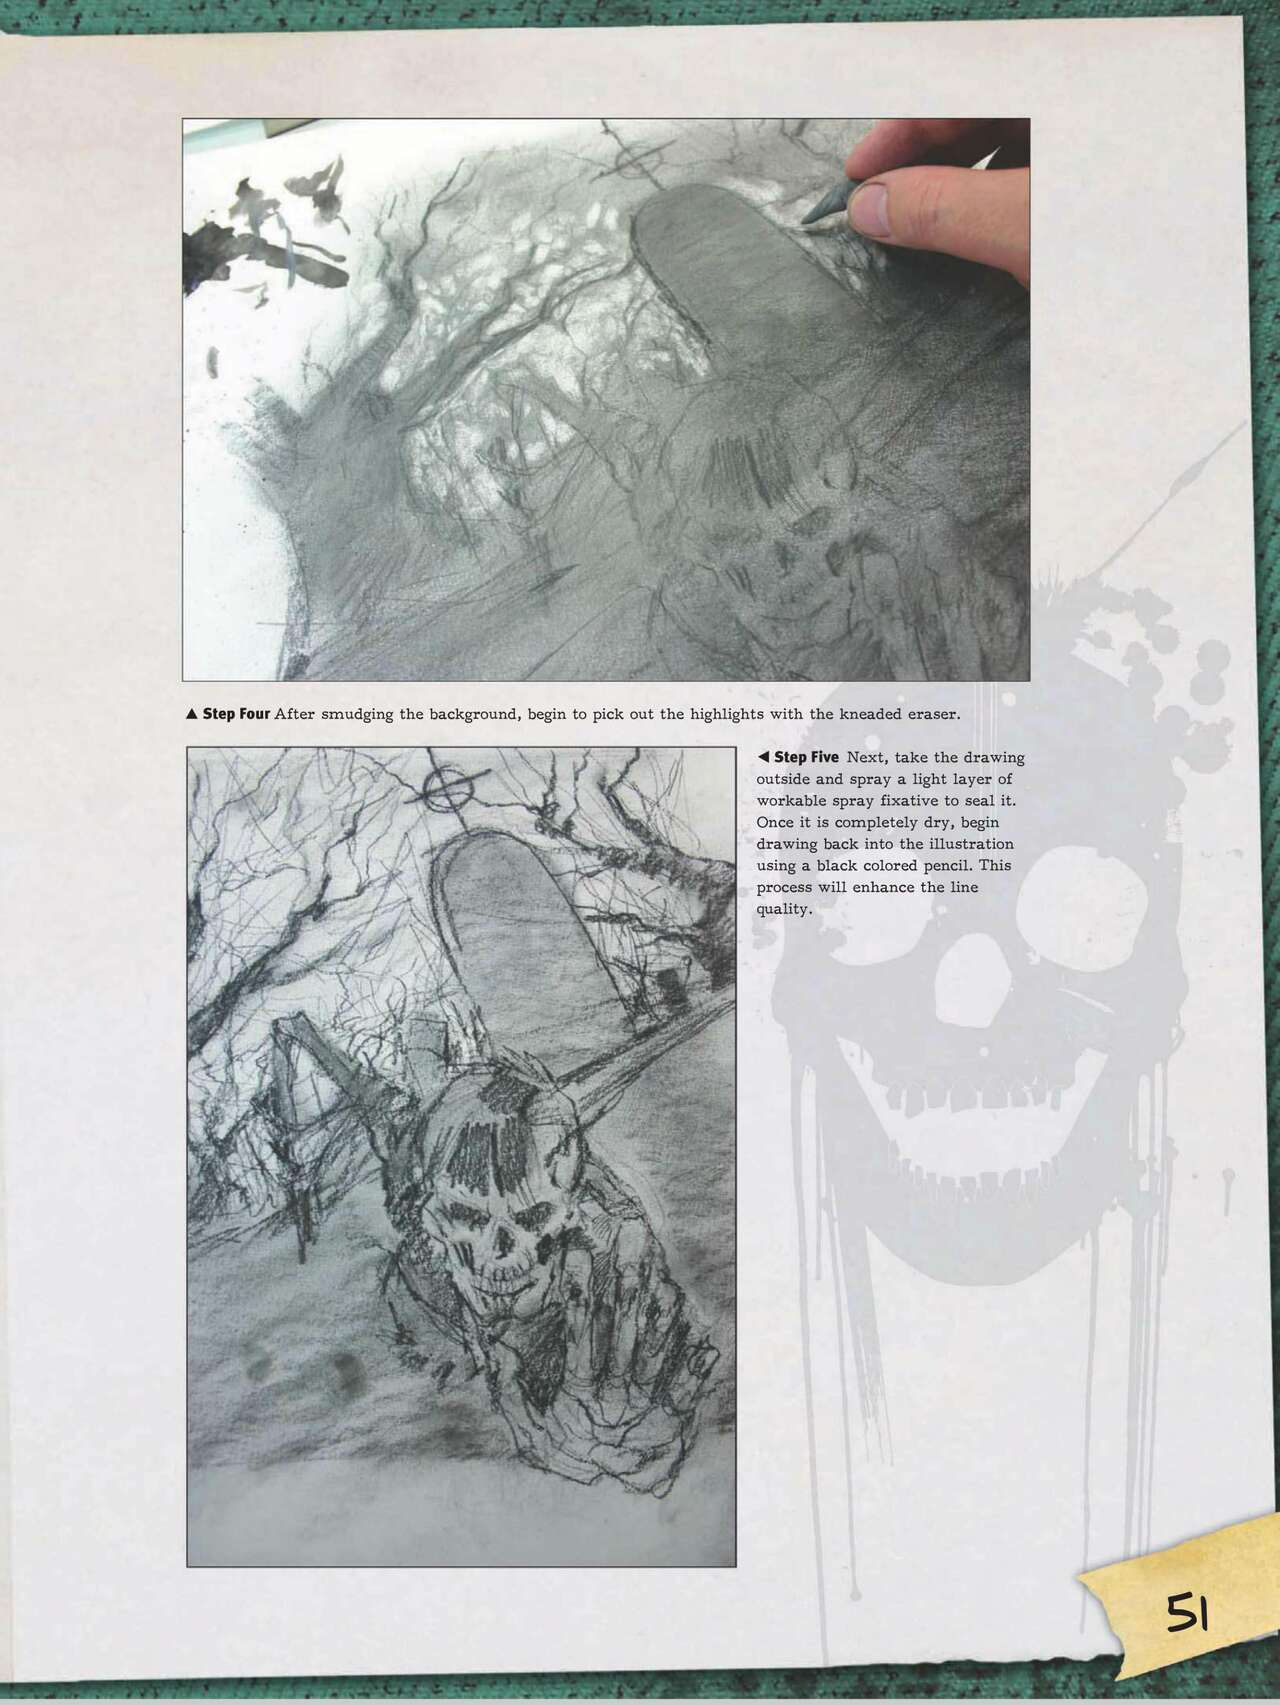 How to Draw Zombies: Discover the secrets to drawing, painting, and illustrating the undead 僵尸描绘集 52